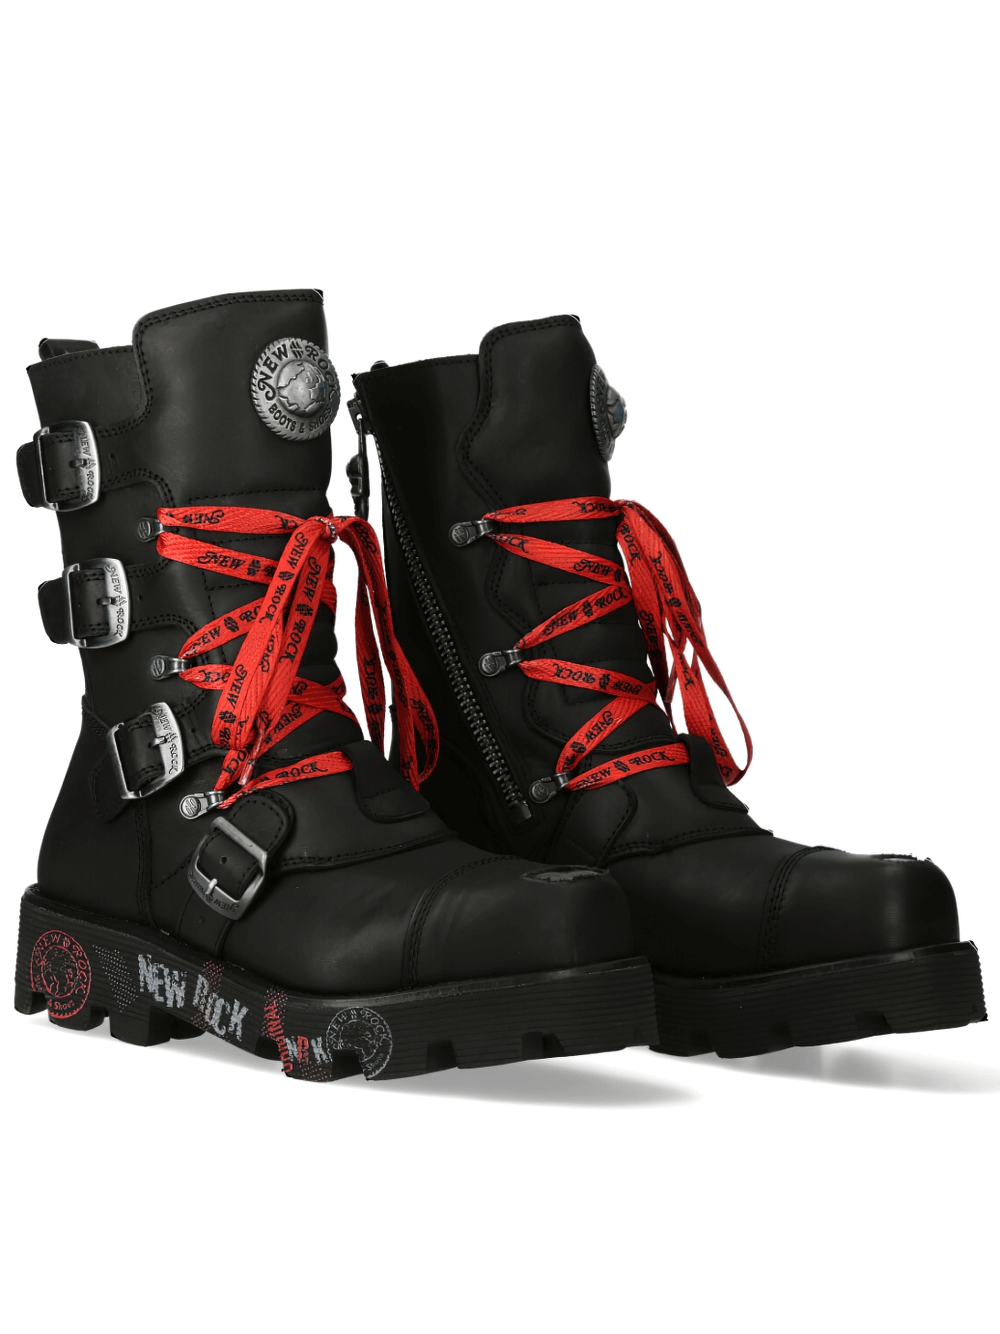 NEW ROCK Black Ranger Boots with Red Laces for Rock Style